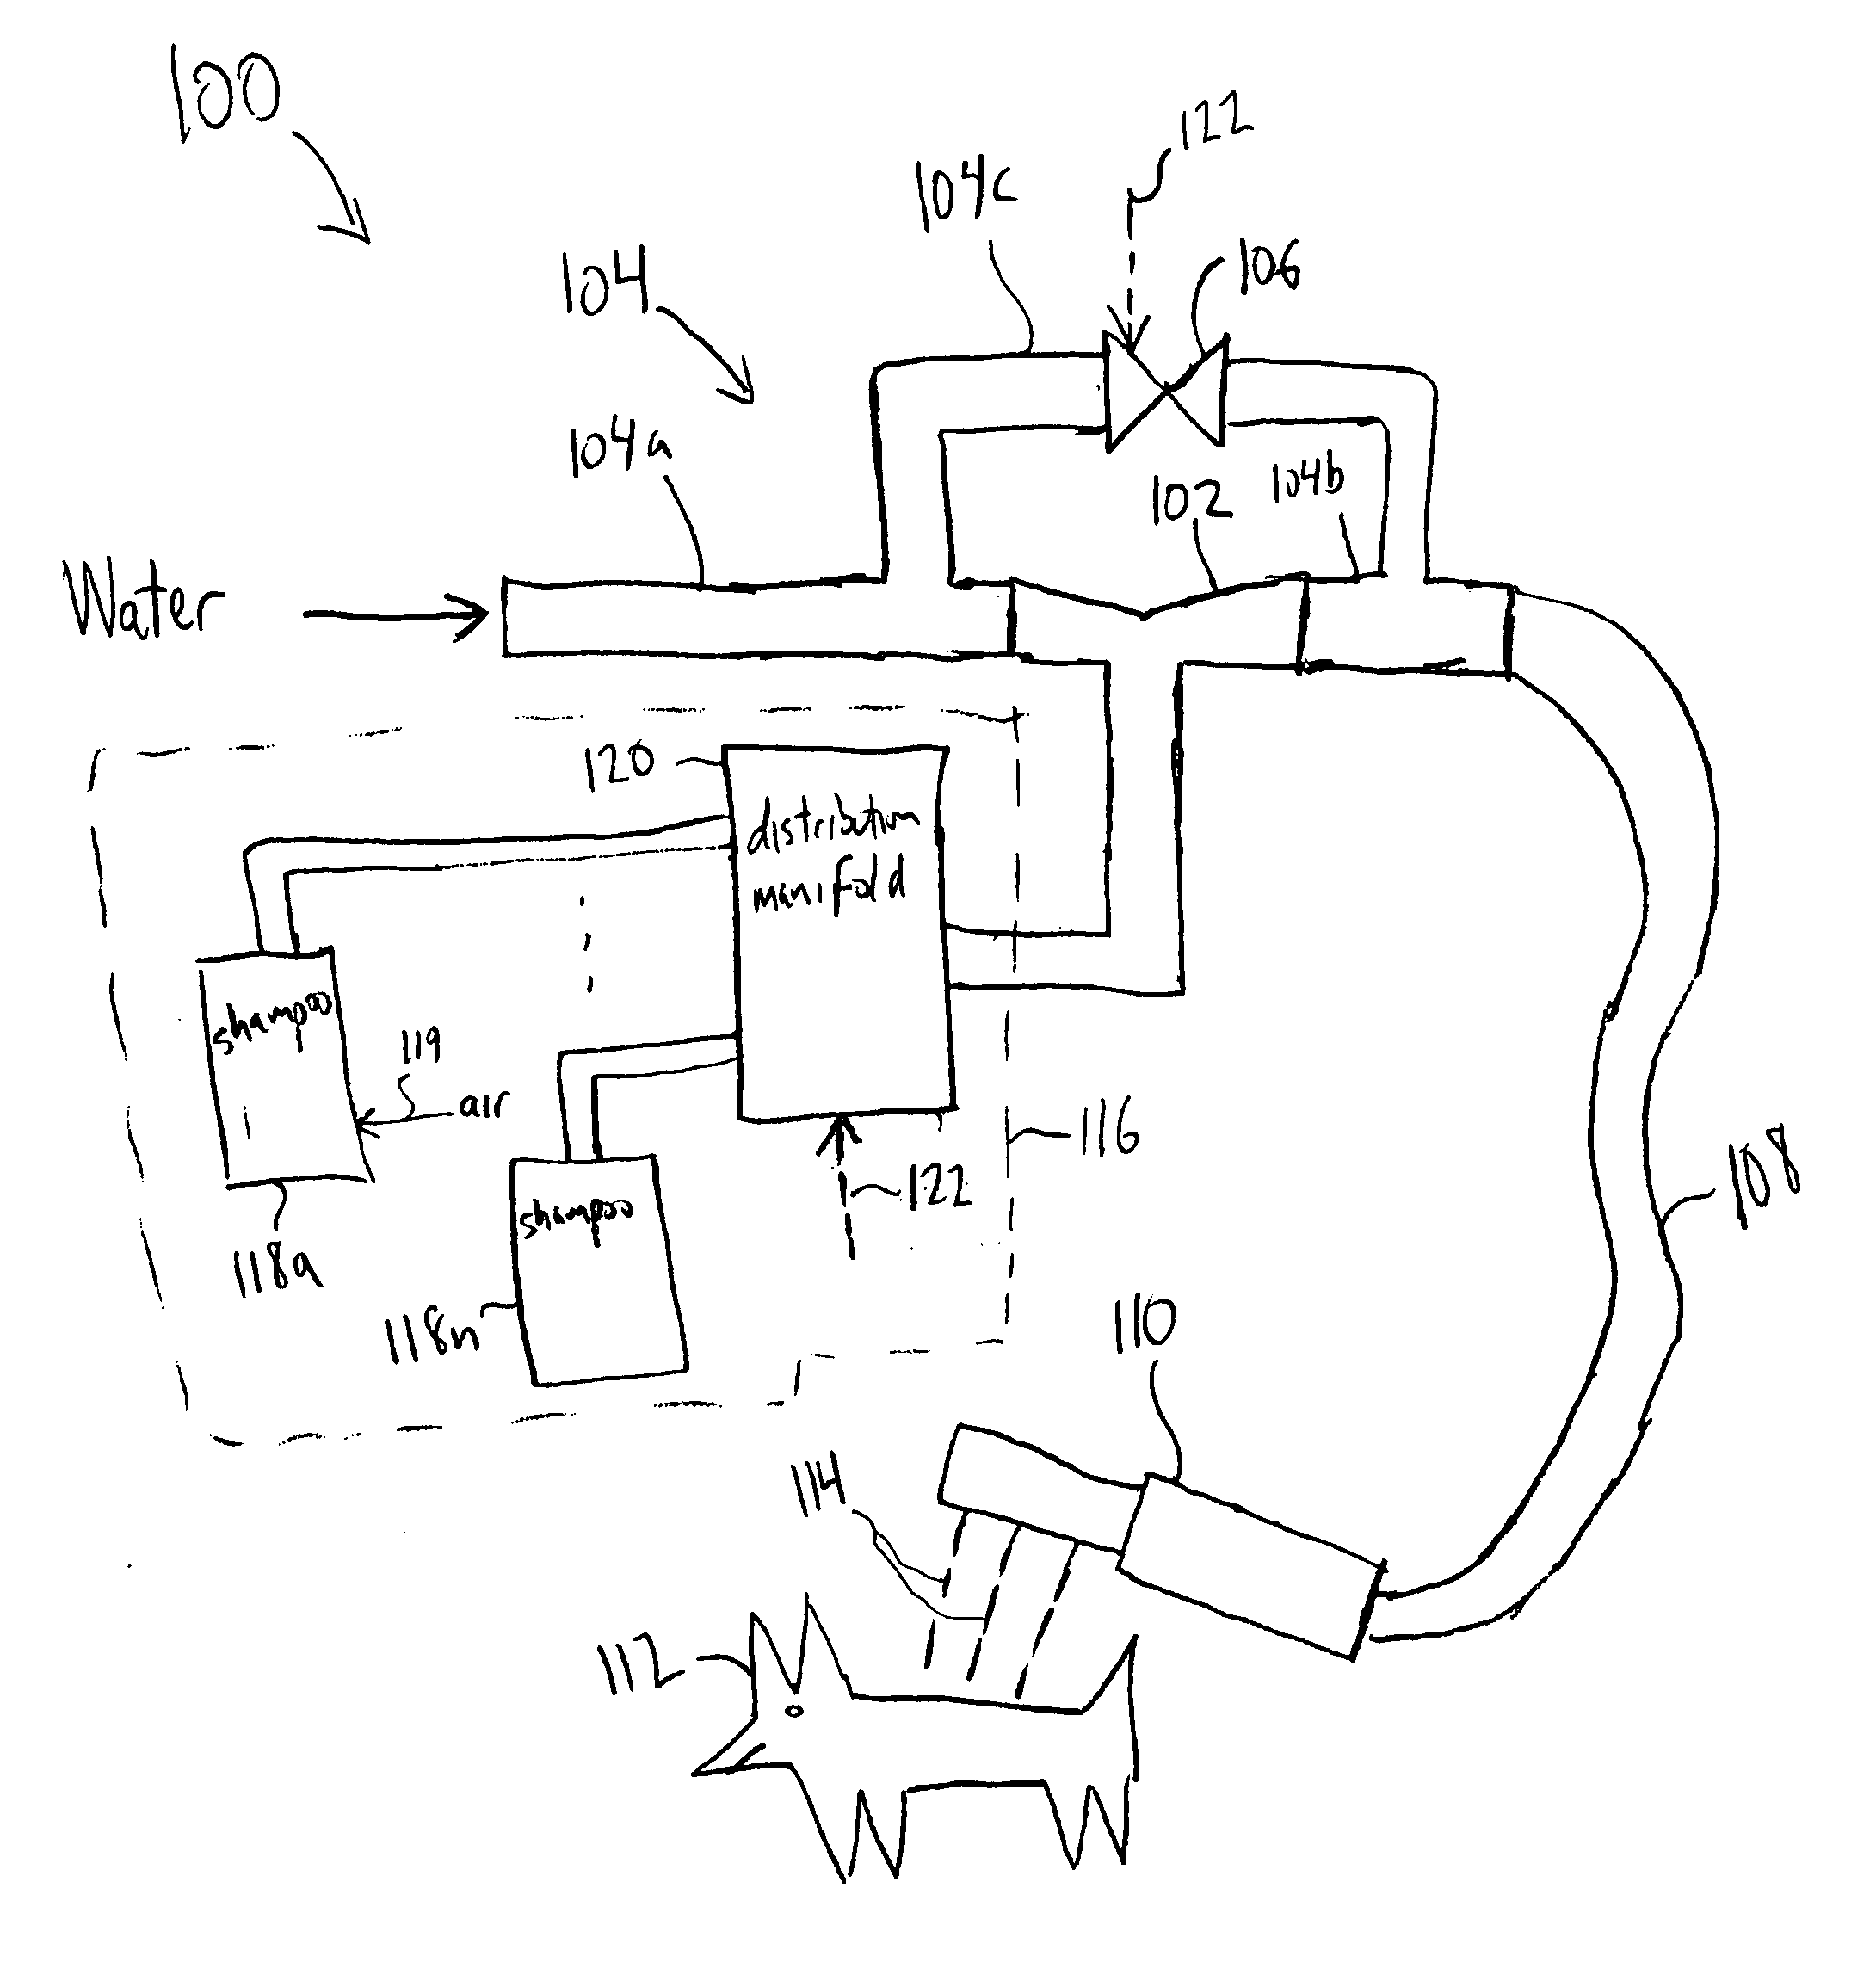 Animal or other object washing system and method